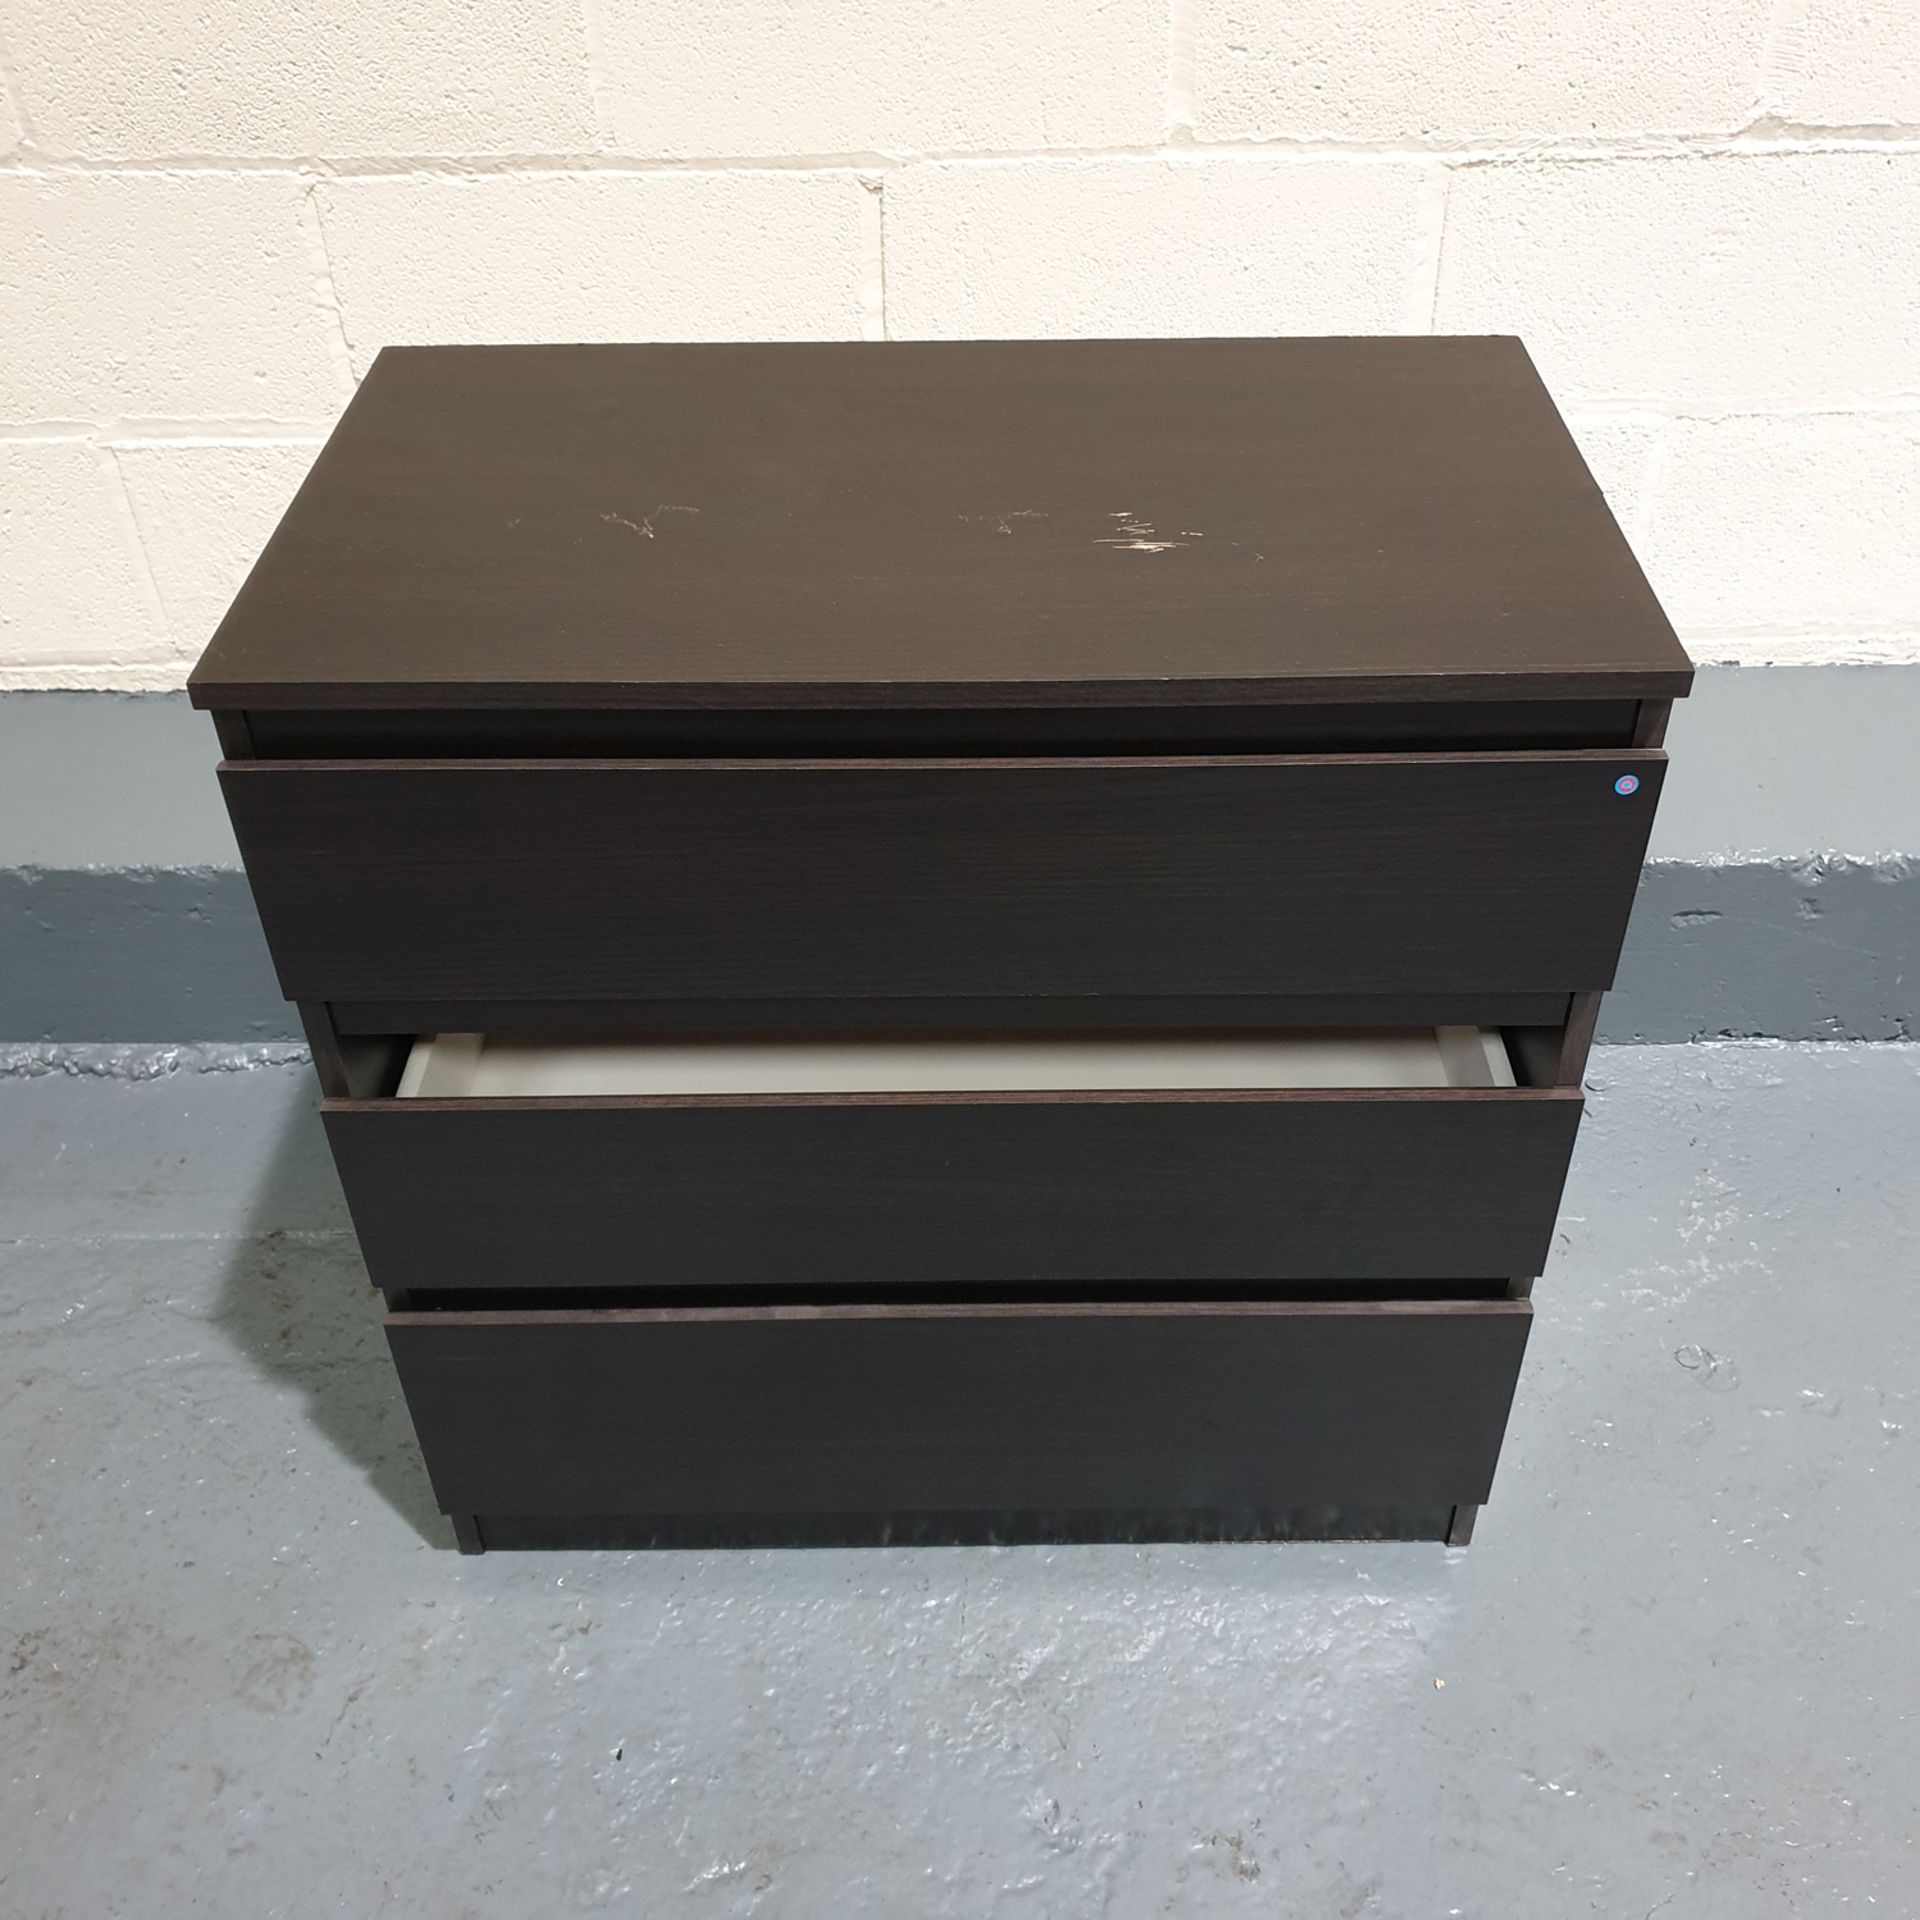 Set of Drawers. Approx Dimensions 700mm x 400mm x 710mm High.